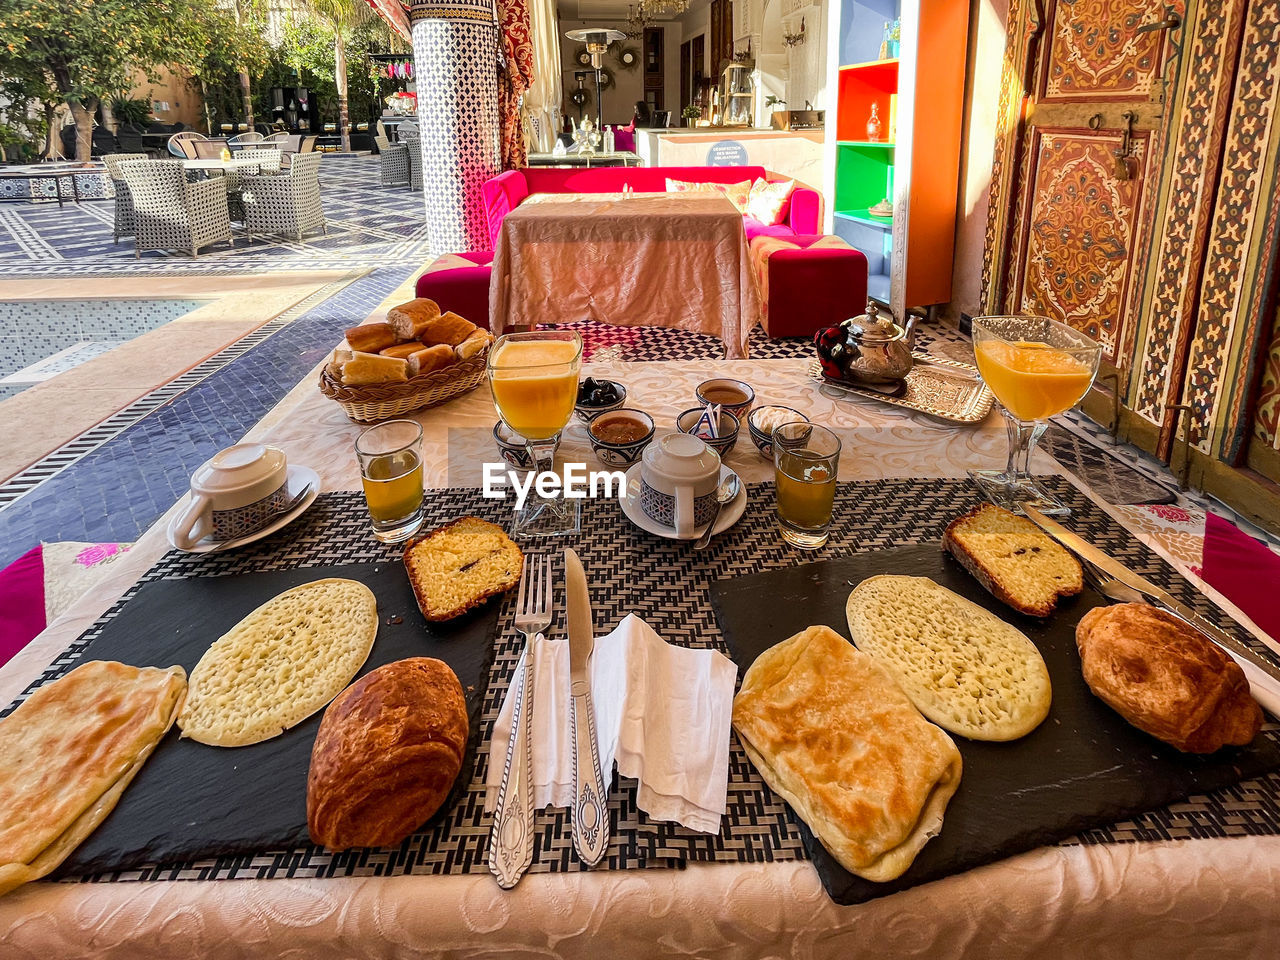 food and drink, food, table, bread, meal, freshness, no people, baked, healthy eating, snack, seat, fast food, brunch, drink, business, wellbeing, day, breakfast, chair, french food, architecture, bakery, furniture, plate, outdoors, restaurant